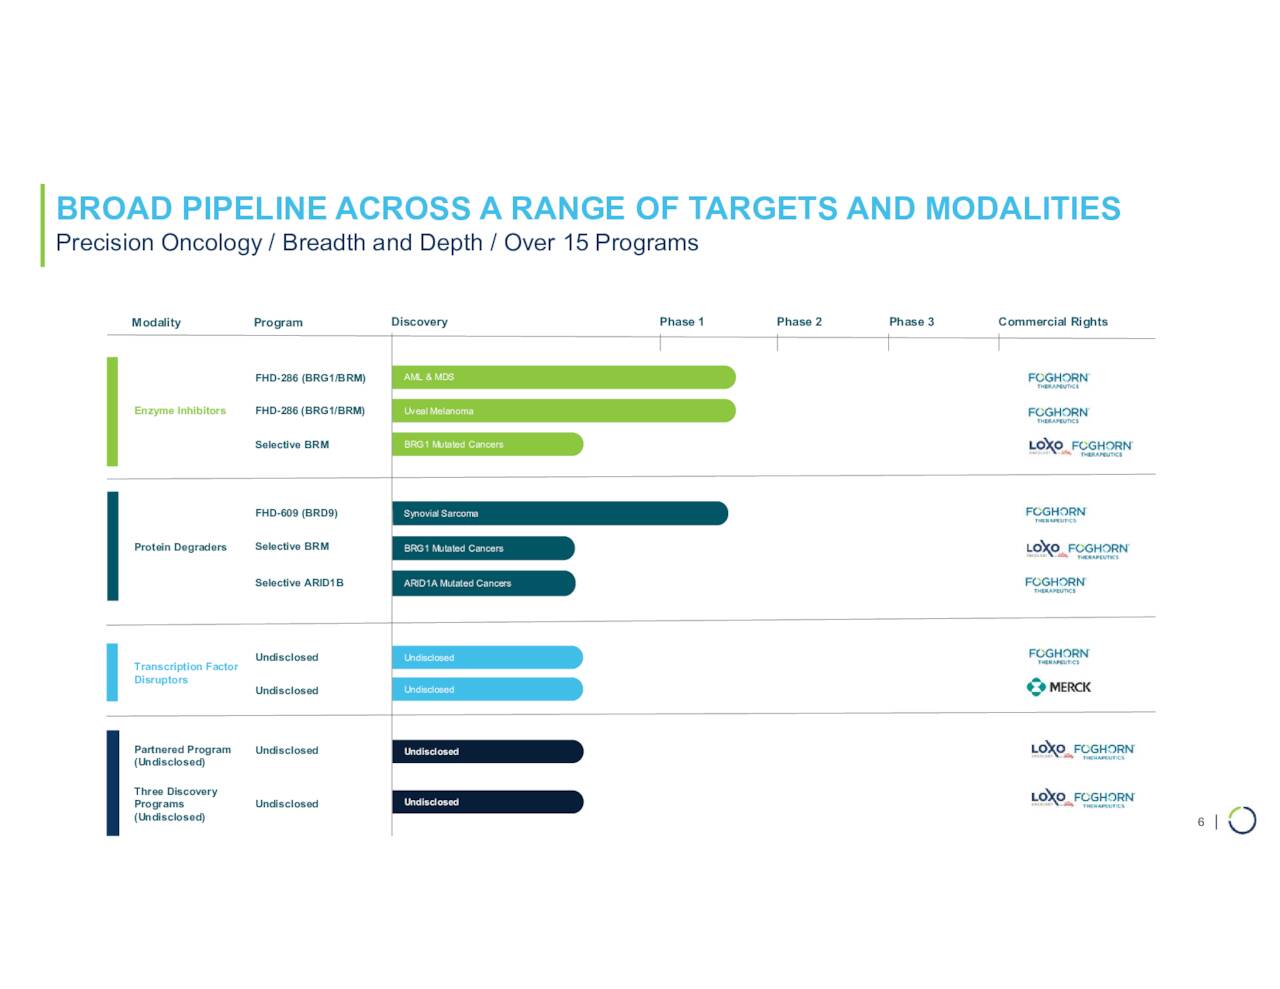 BROAD PIPELINE ACROSS A RANGE OF TARGETS AND MODALITIES